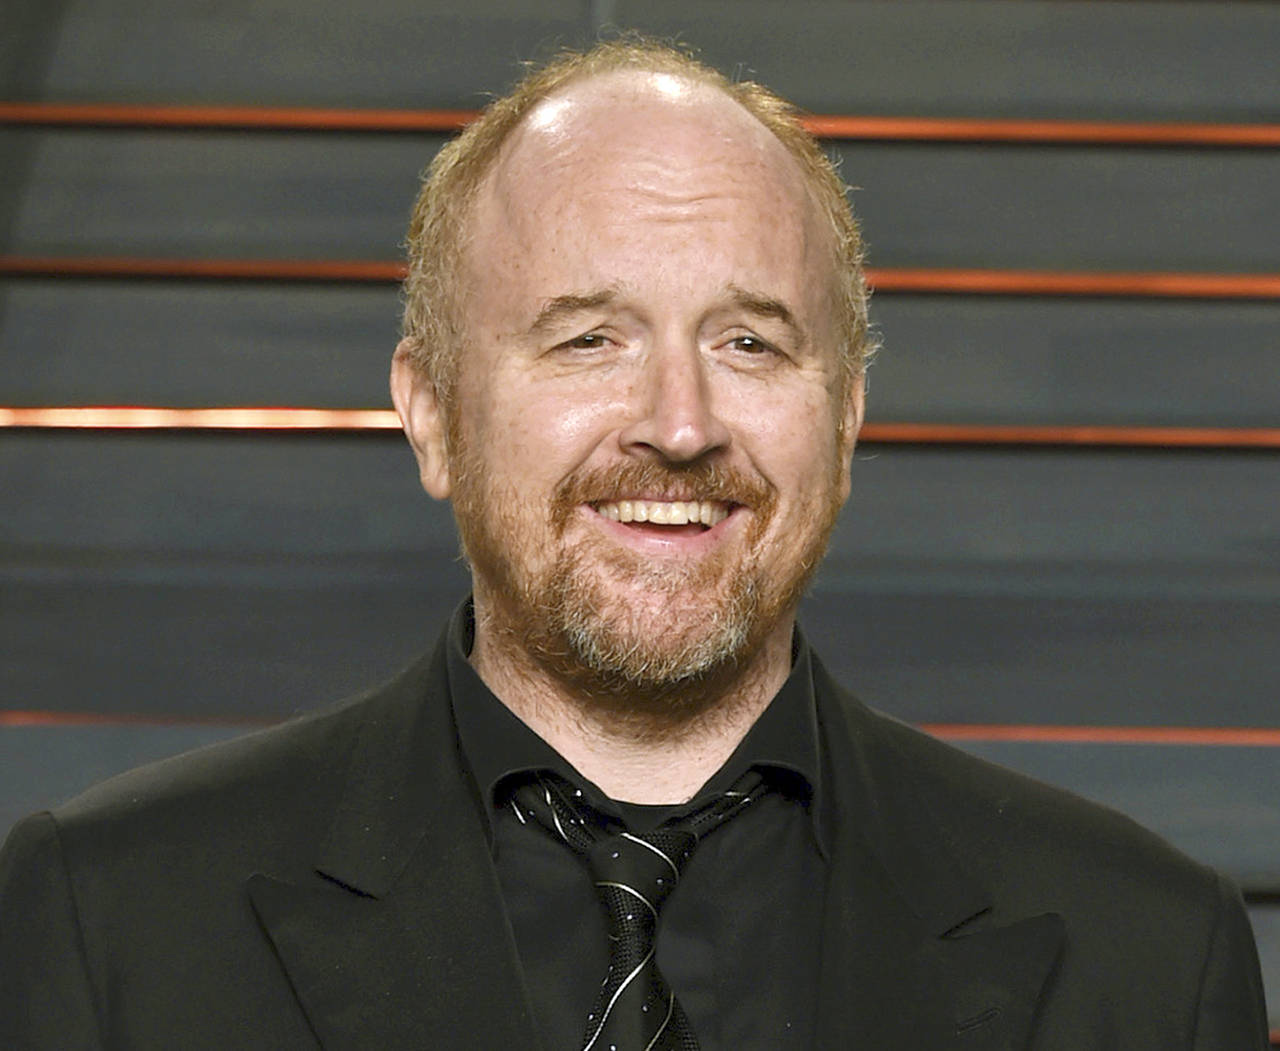 In this 2016 photo, Louis C.K. arrives at the Vanity Fair Oscar Party in Beverly Hills, California. (Evan Agostini/Invision/AP, File)